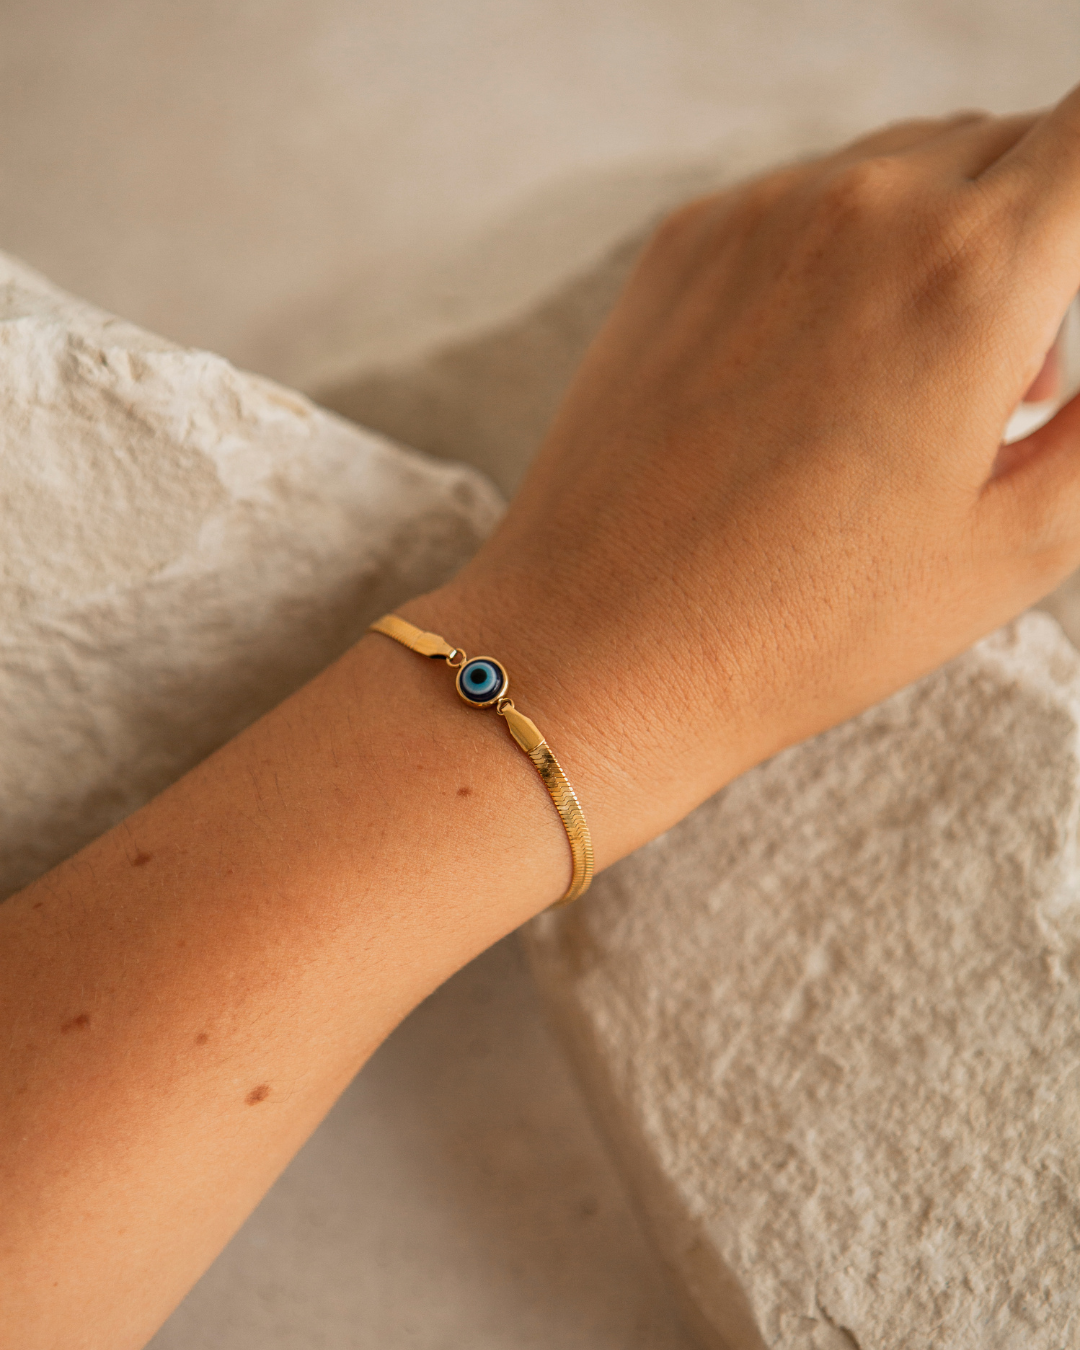 Around which hand should you wear an evil eye bracelet?